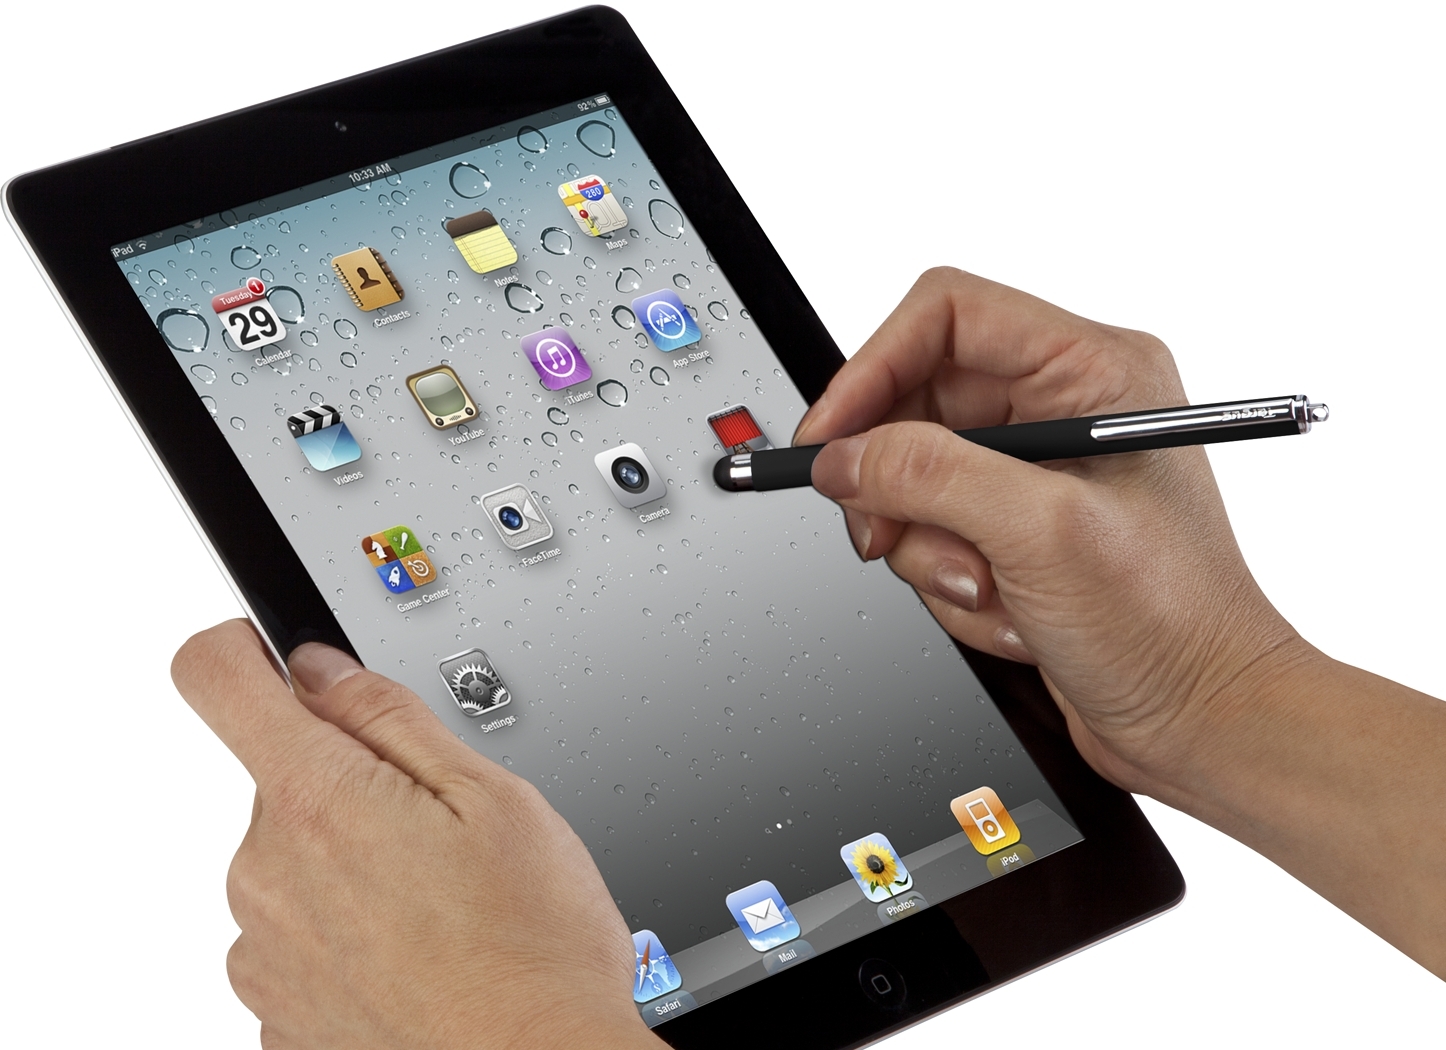  A person's hands holding a tablet with a stylus pen poised above the screen with various apps displayed on the device.